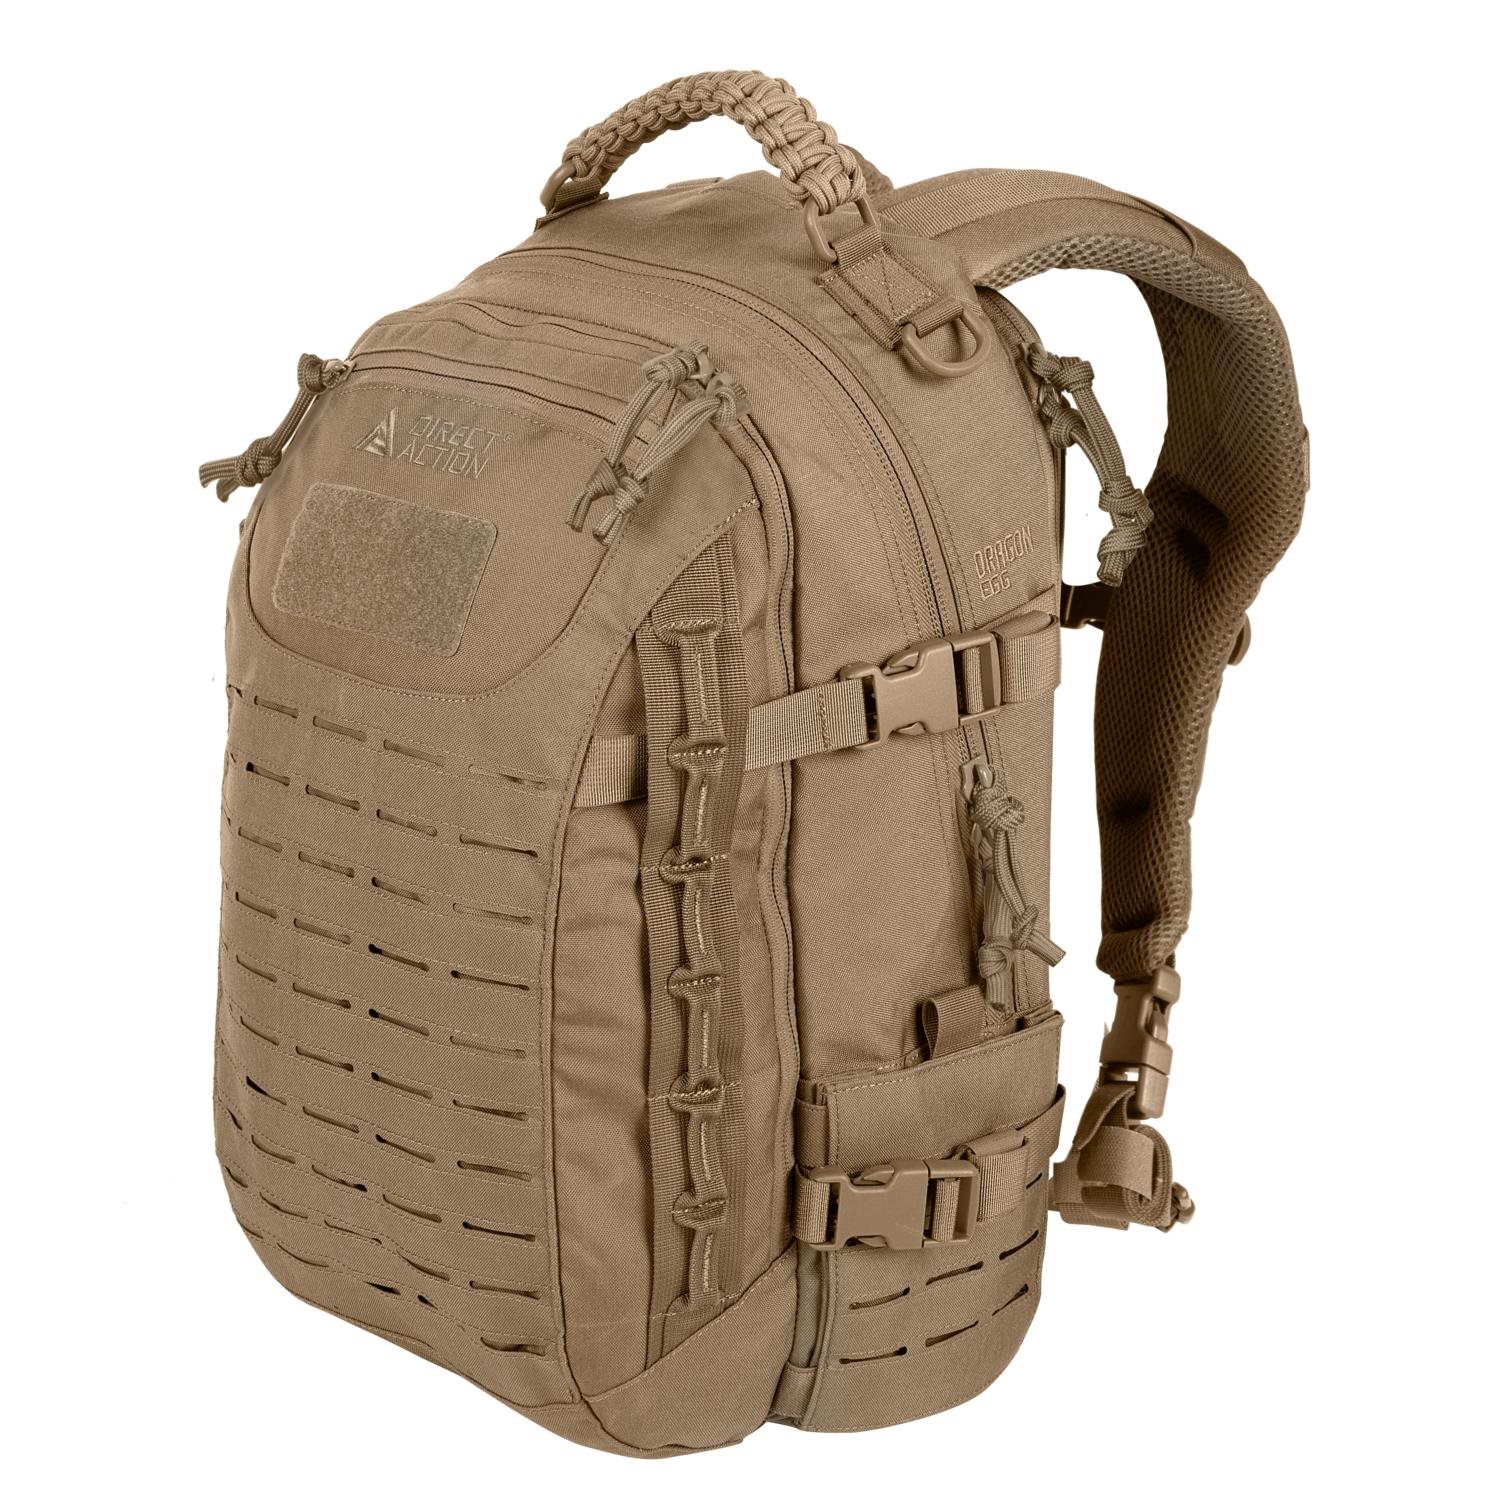 Backpack DRAGON EGG® MKII COYOTE BROWN DIRECT ACTION® BP-DEGG-CD5-CBR L-11